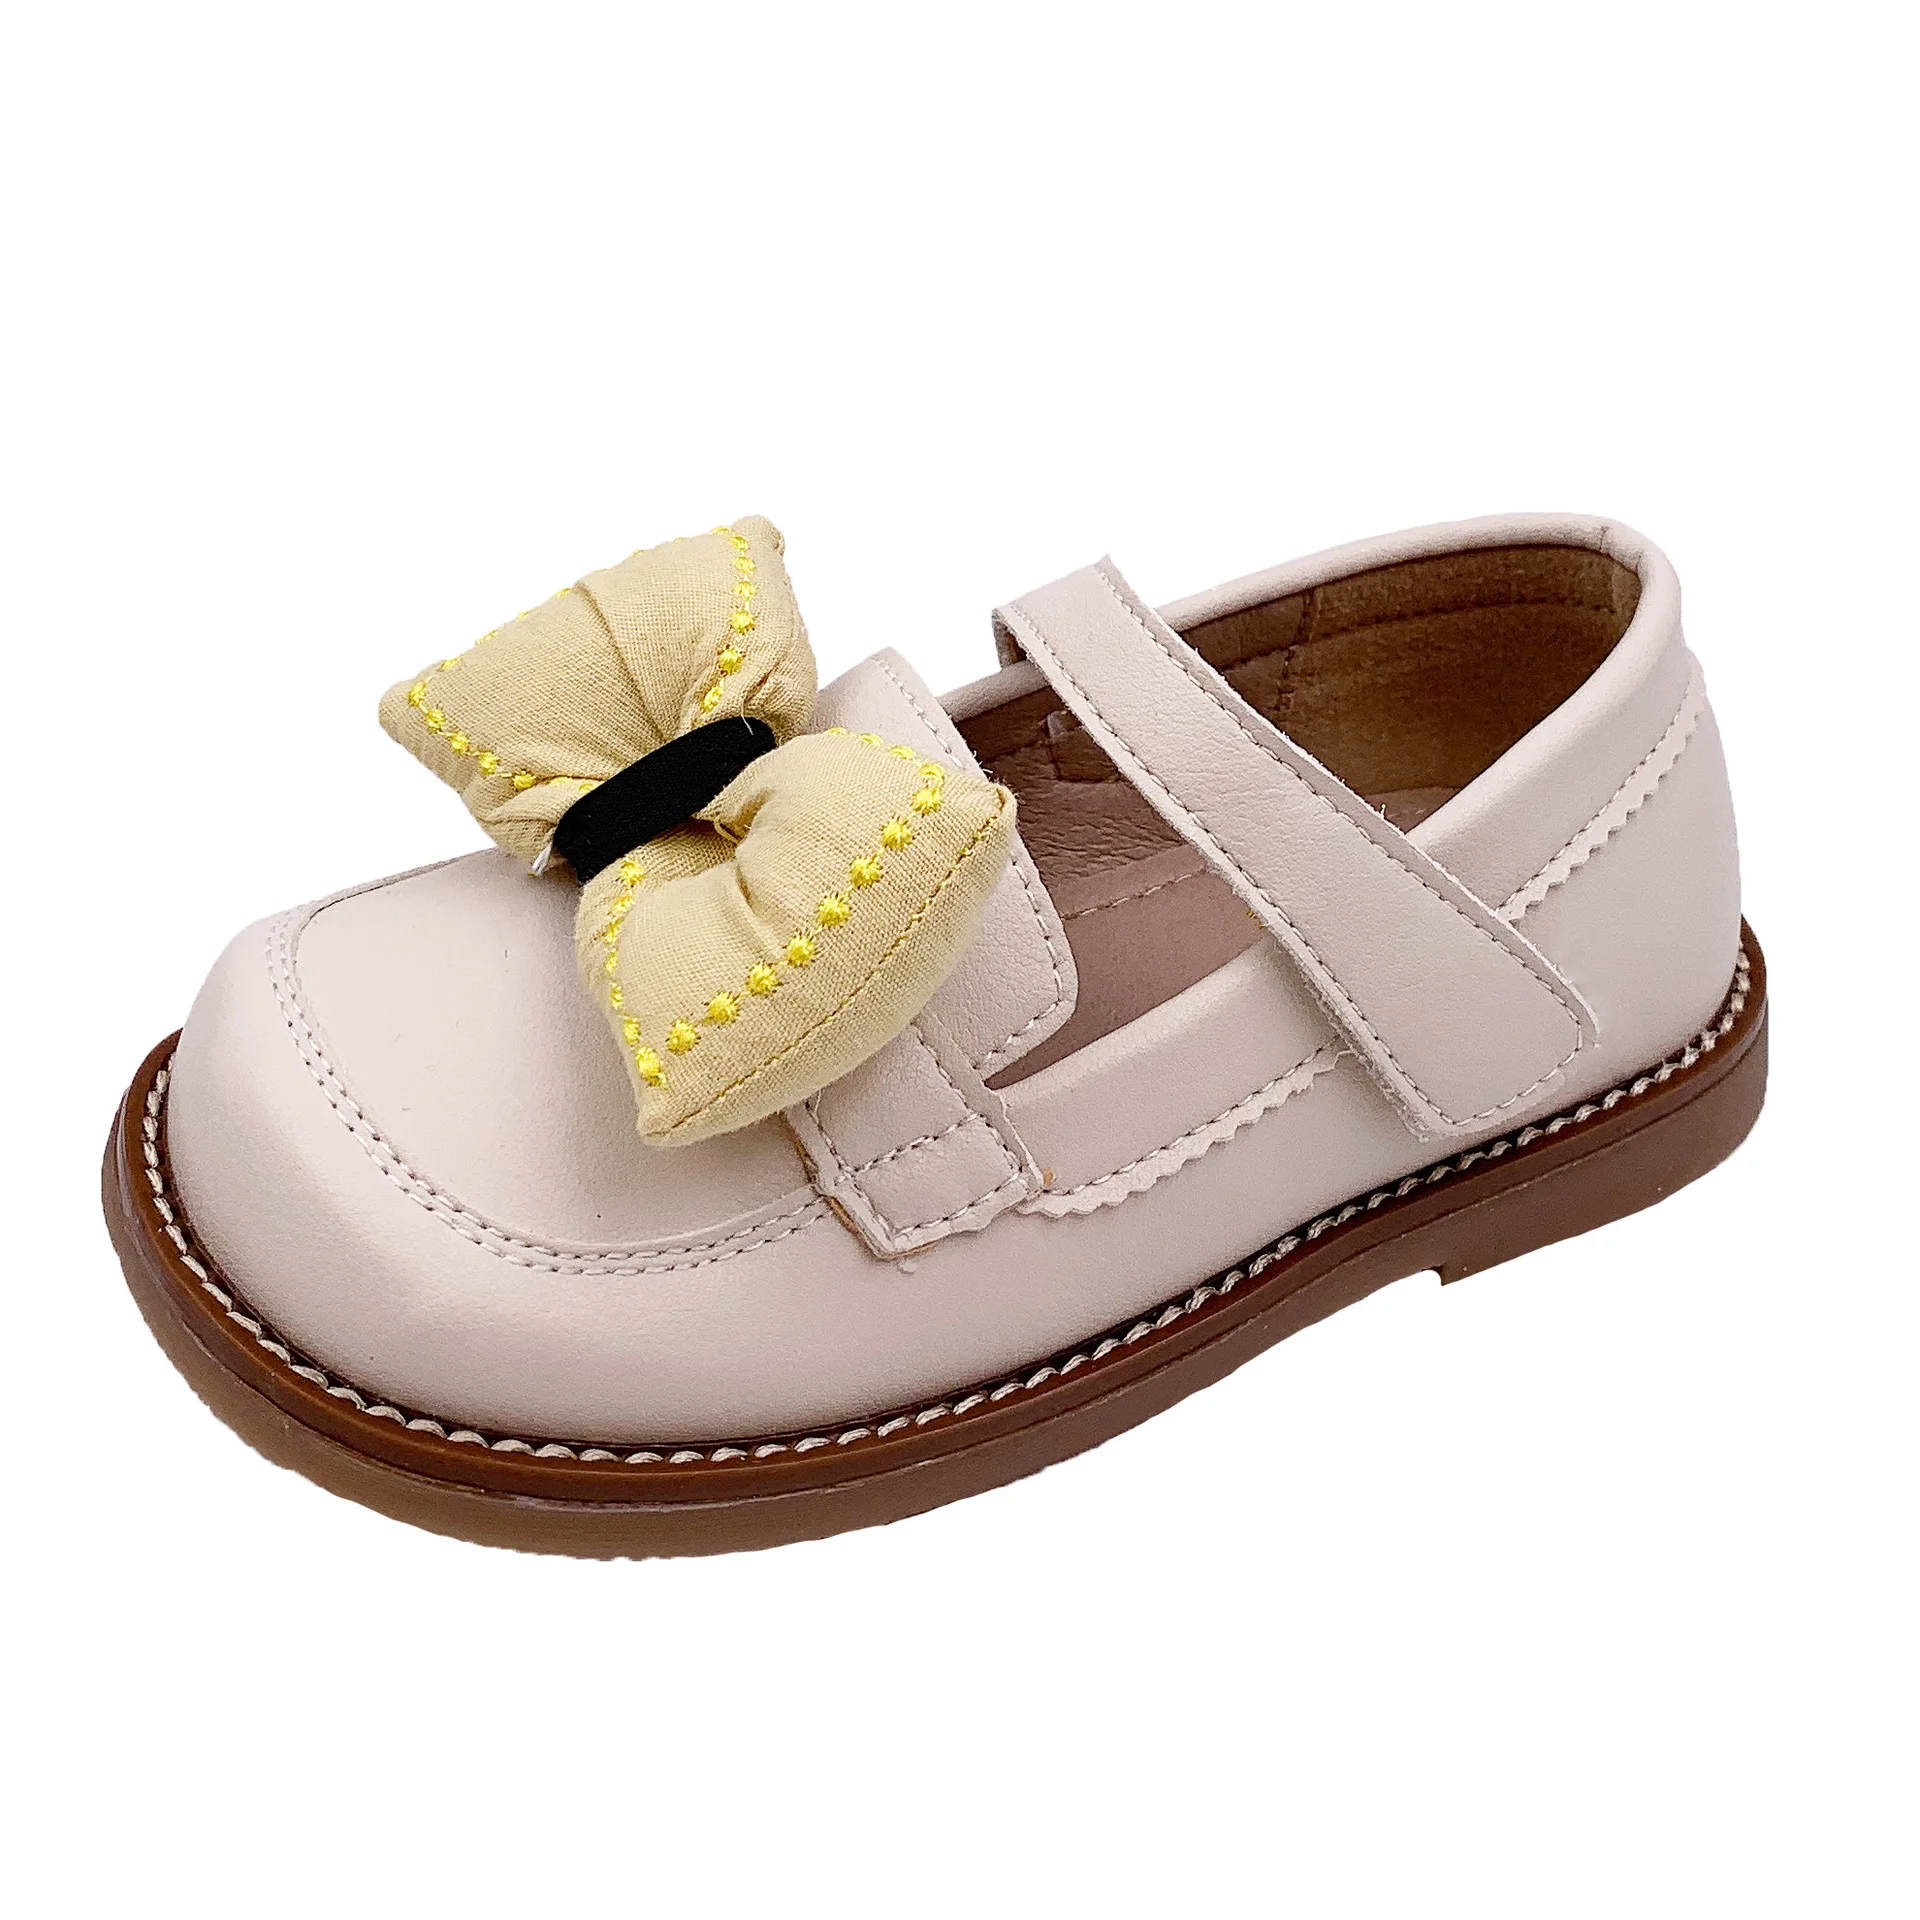 Girls Bow-knot Princess Shoes 2021 New Square Mouth British Leather Shoes Kids All-match Peas Shoes Teenage Spring Fall Flats